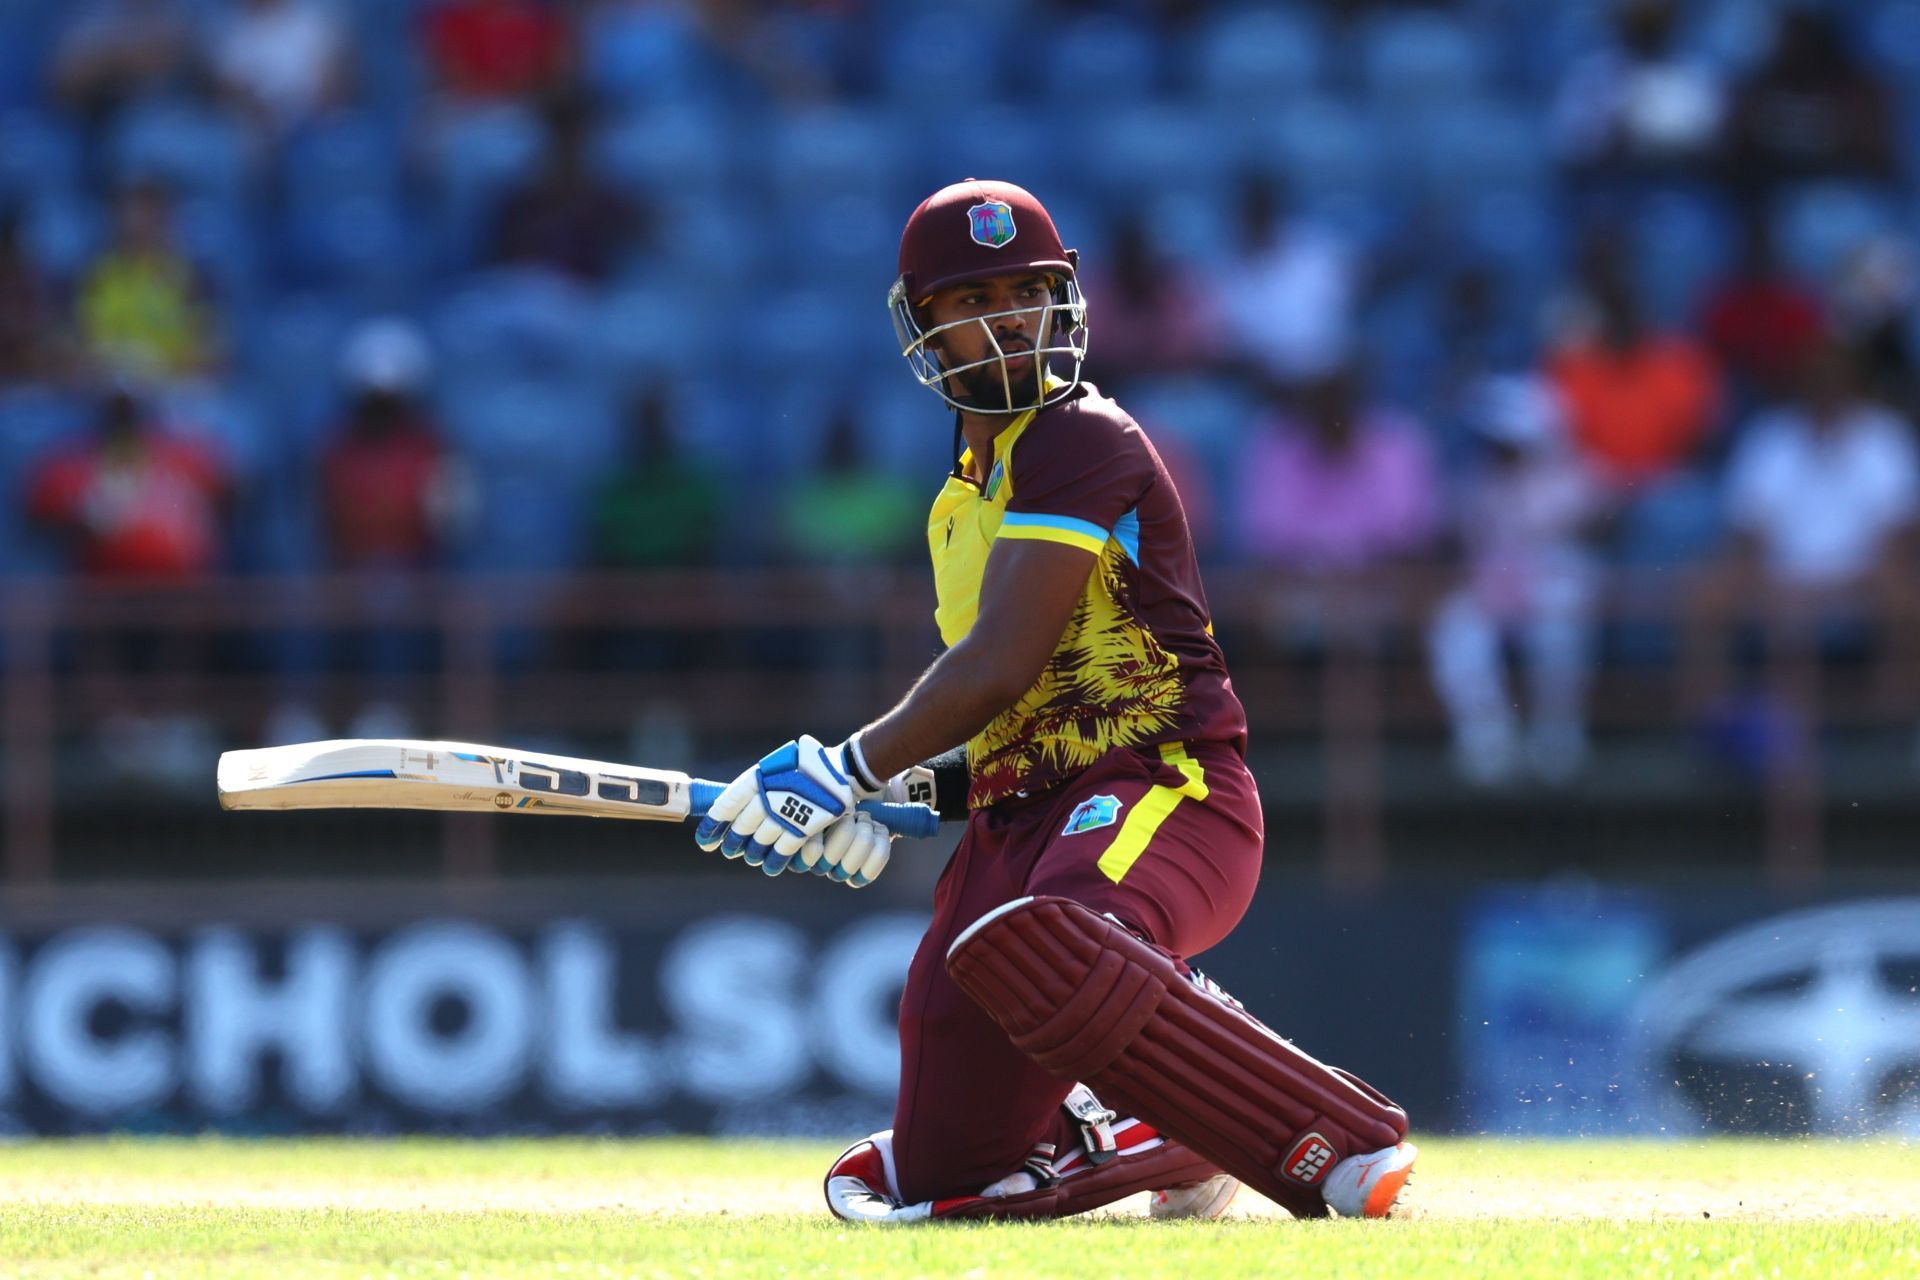 Nicholas Pooran has really improved against spin